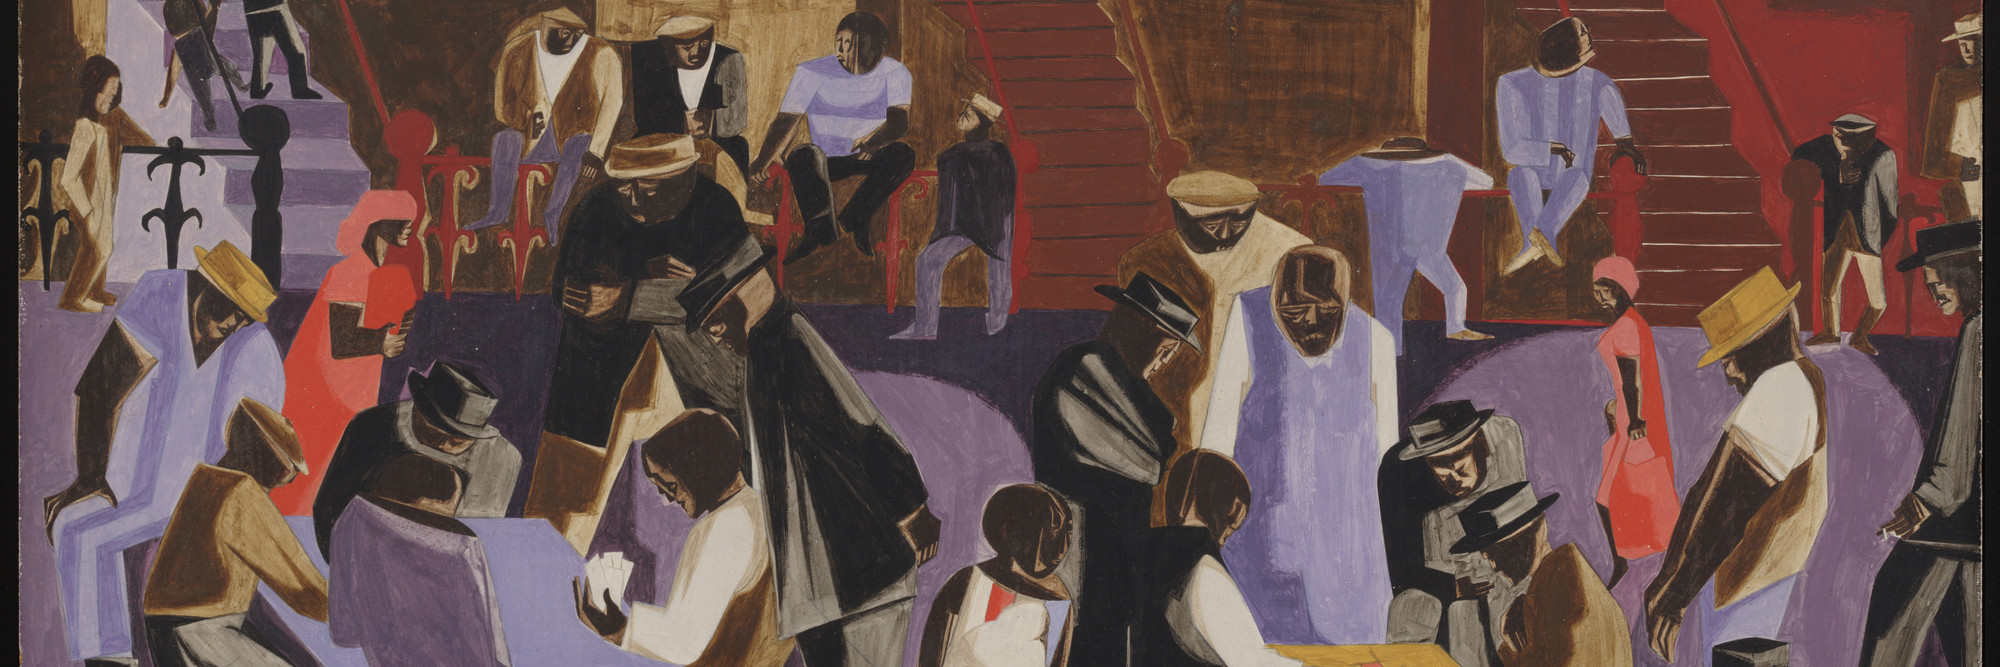 Jacob Lawrence. Street Shadows. 1959. Tempera on gesso on board, 24 × 29 7/8″ (61 × 75.9 cm). The Museum of Modern Art, New York. Gift of Ellen Kern in memory of her parents, Lewis and Jewel Garlick. © Gwendolyn Knight Lawrence, courtesy the Jacob and Gwendolyn Lawrence Foundation